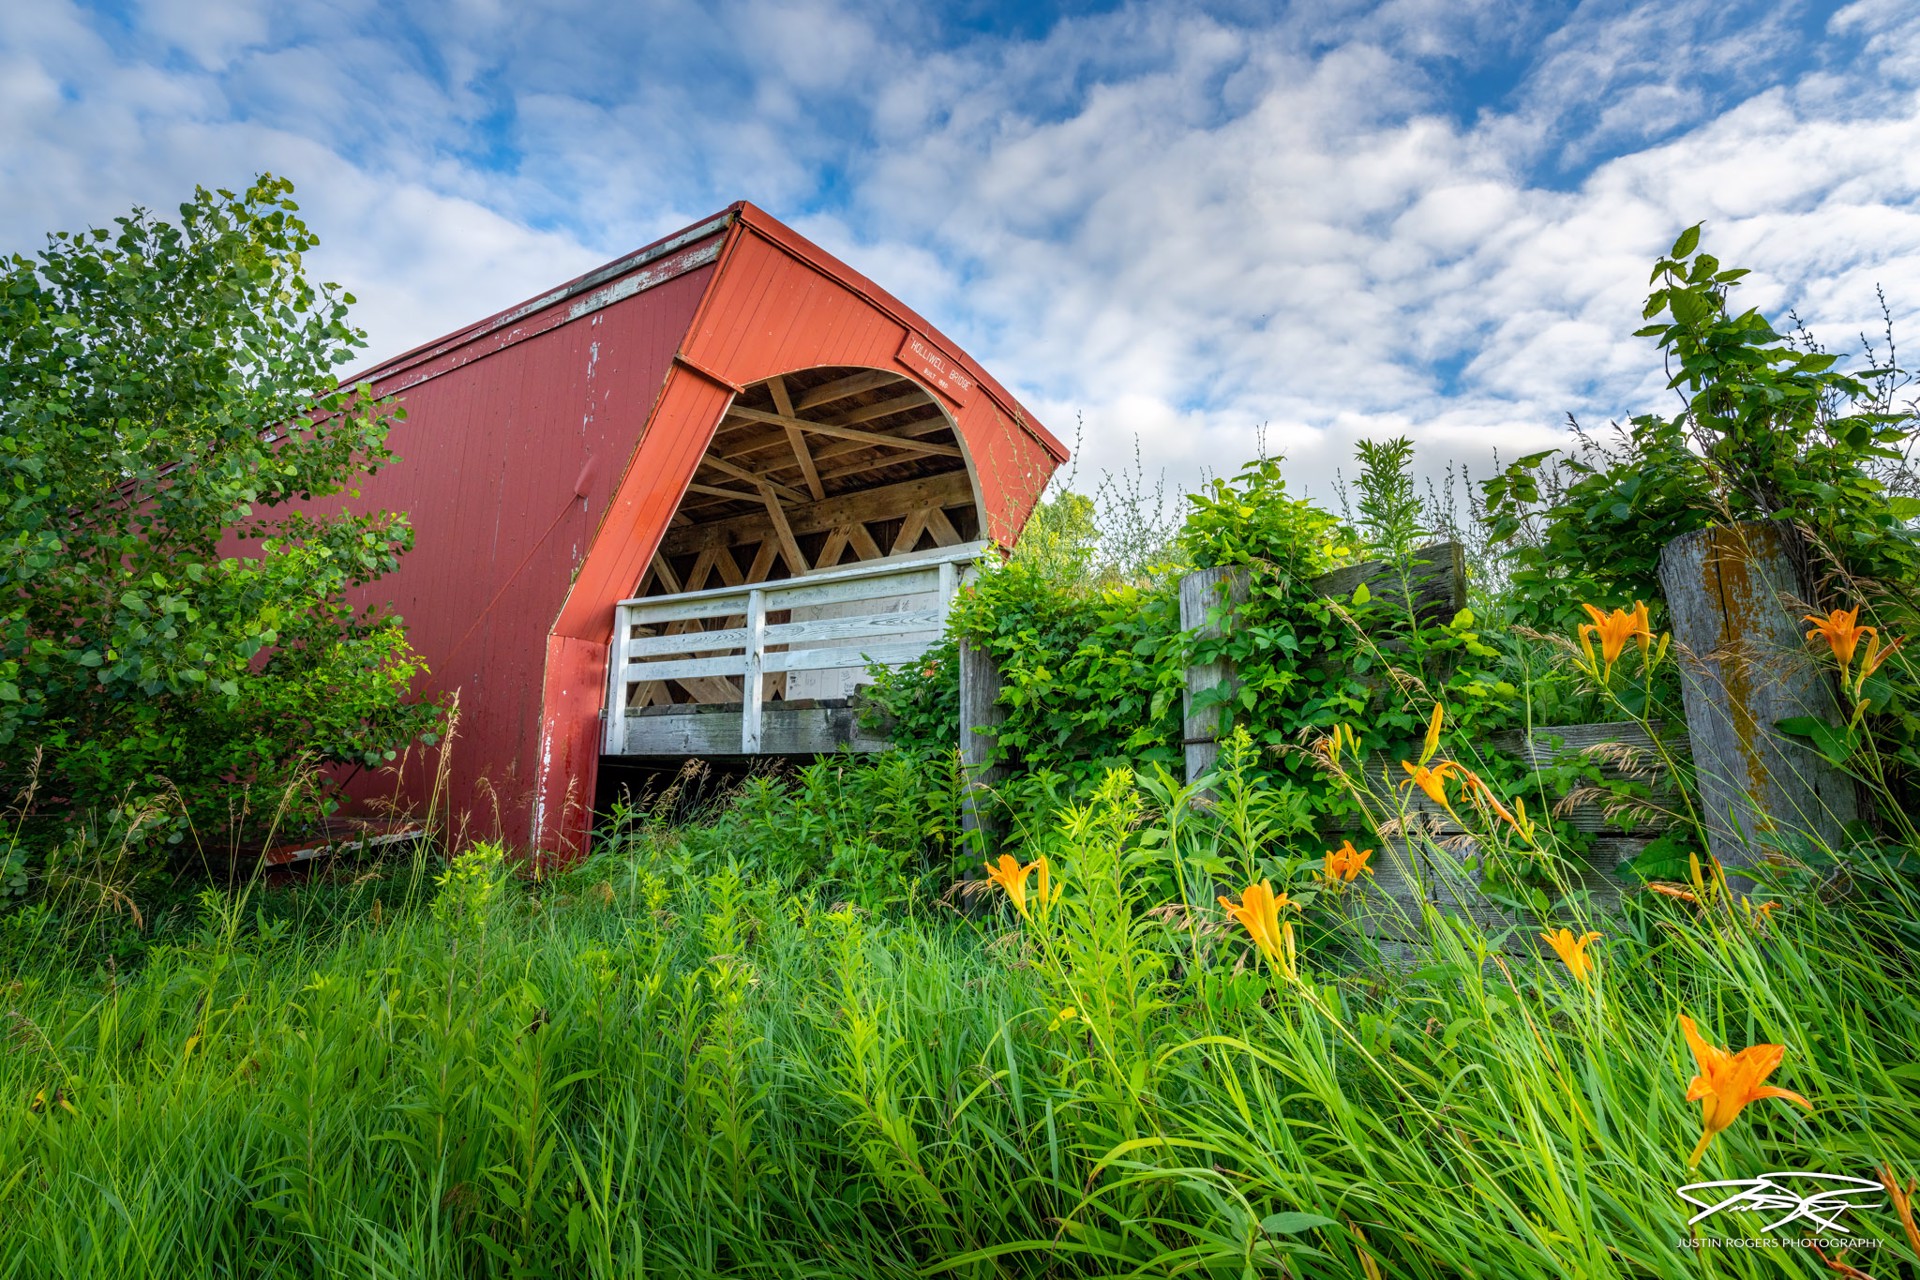 Sunset at Holliwell Covered Bridge by Justin Rogers